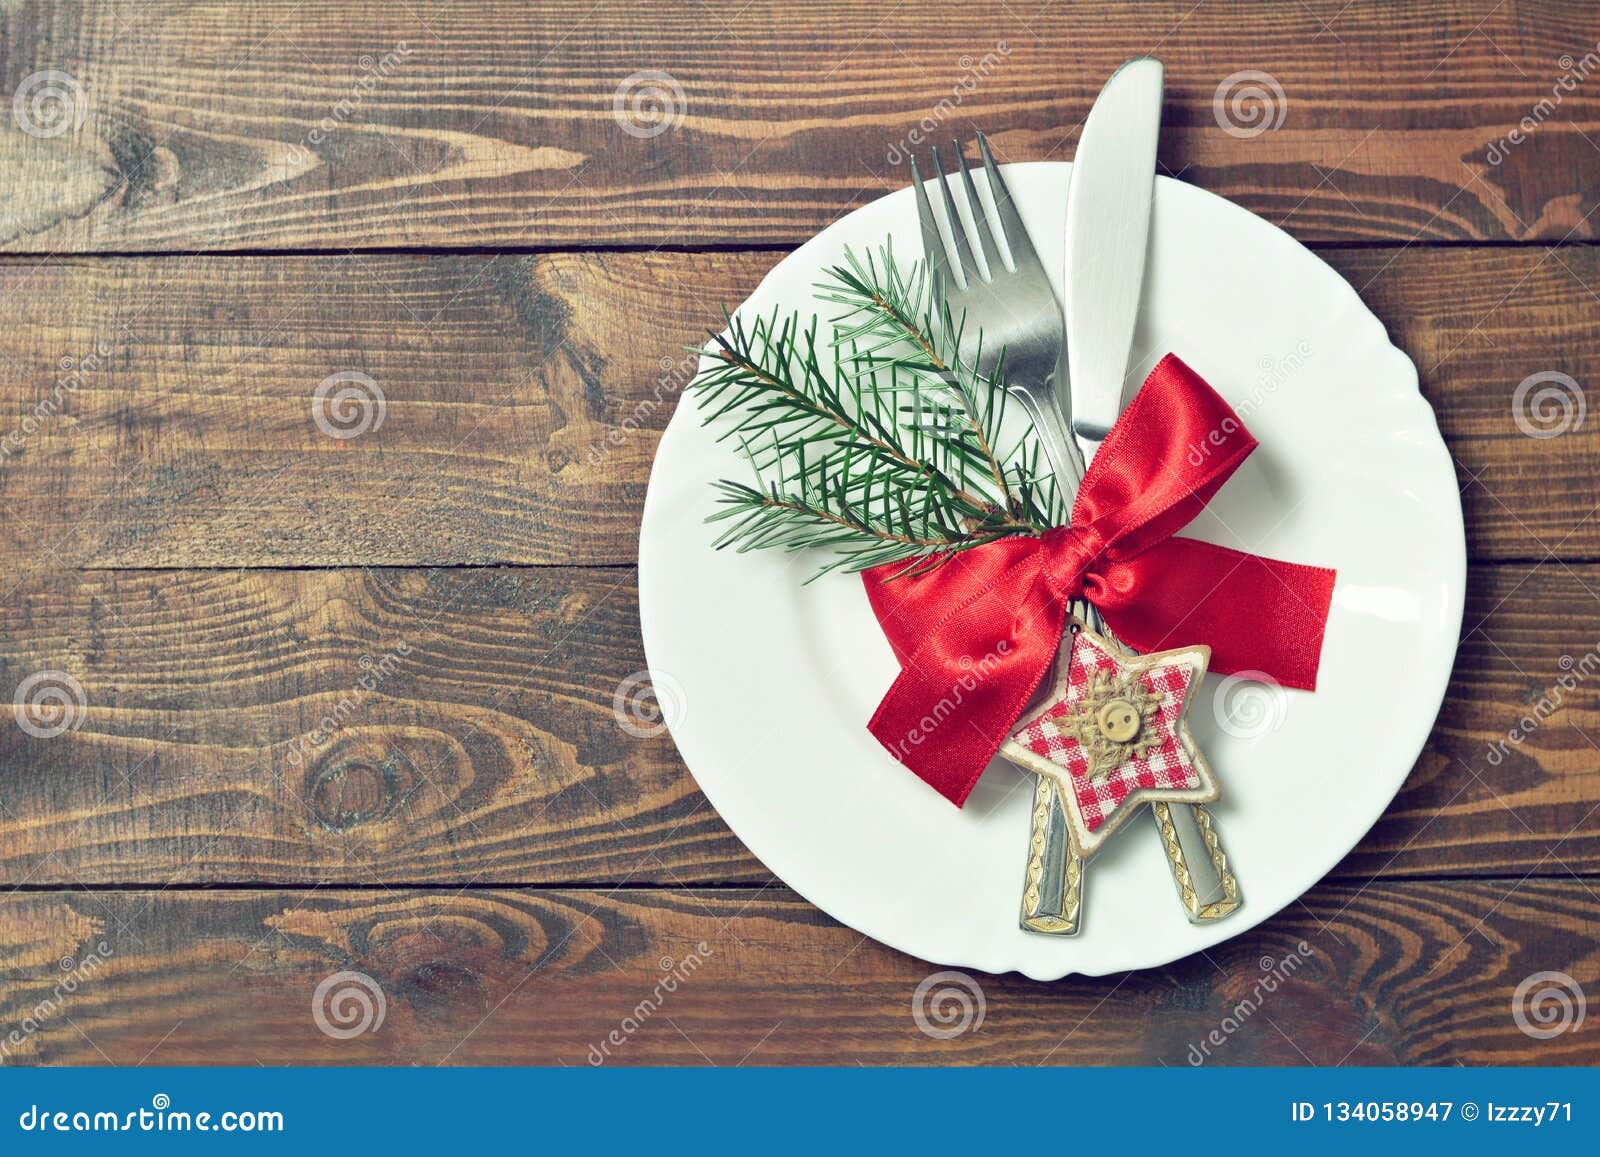 Christmas Dinner Plate and Cutlery Stock Image - Image of dinner ...